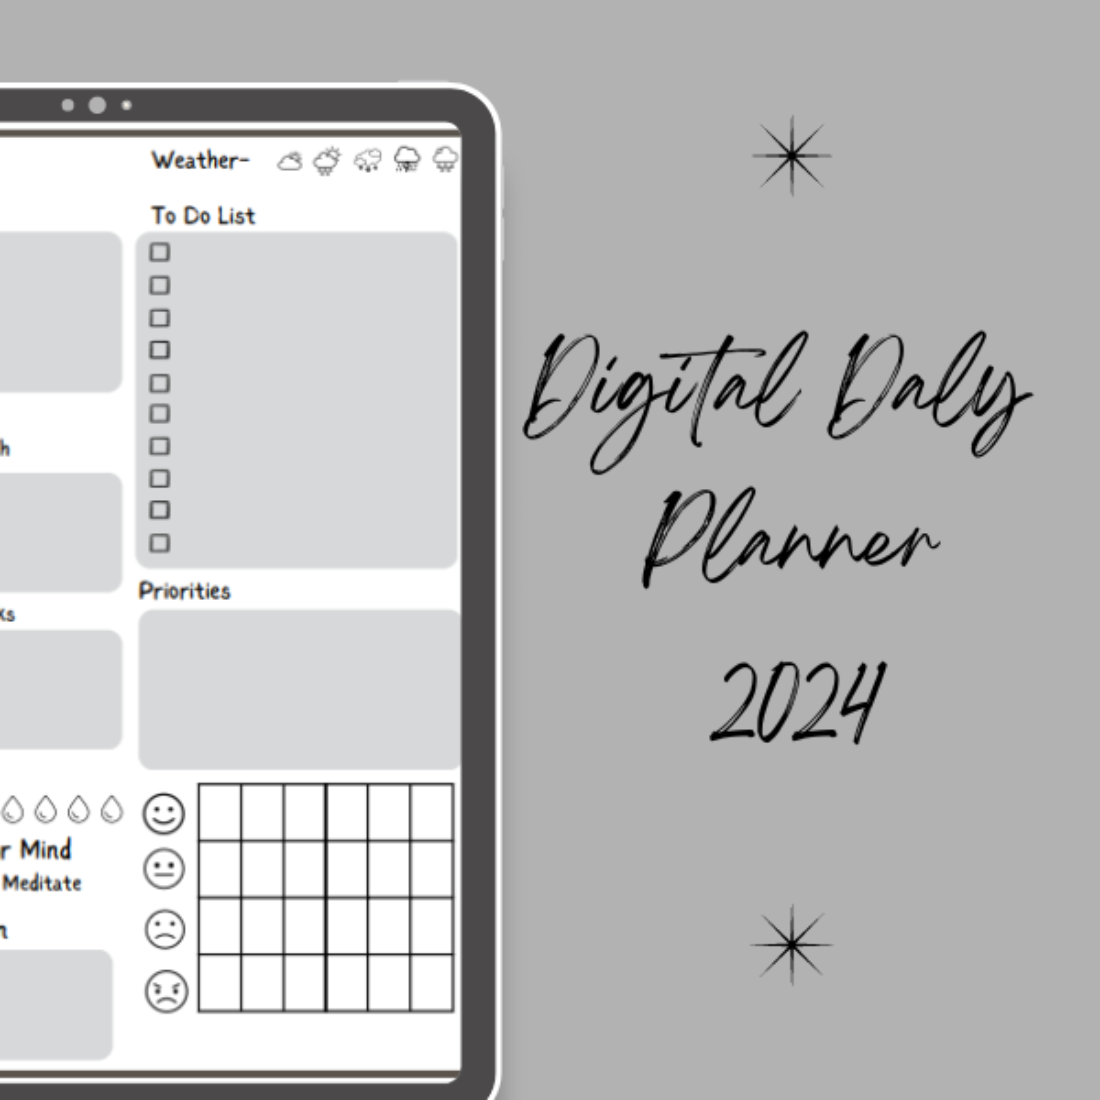 Digital Daily Planner 2024 cover image.